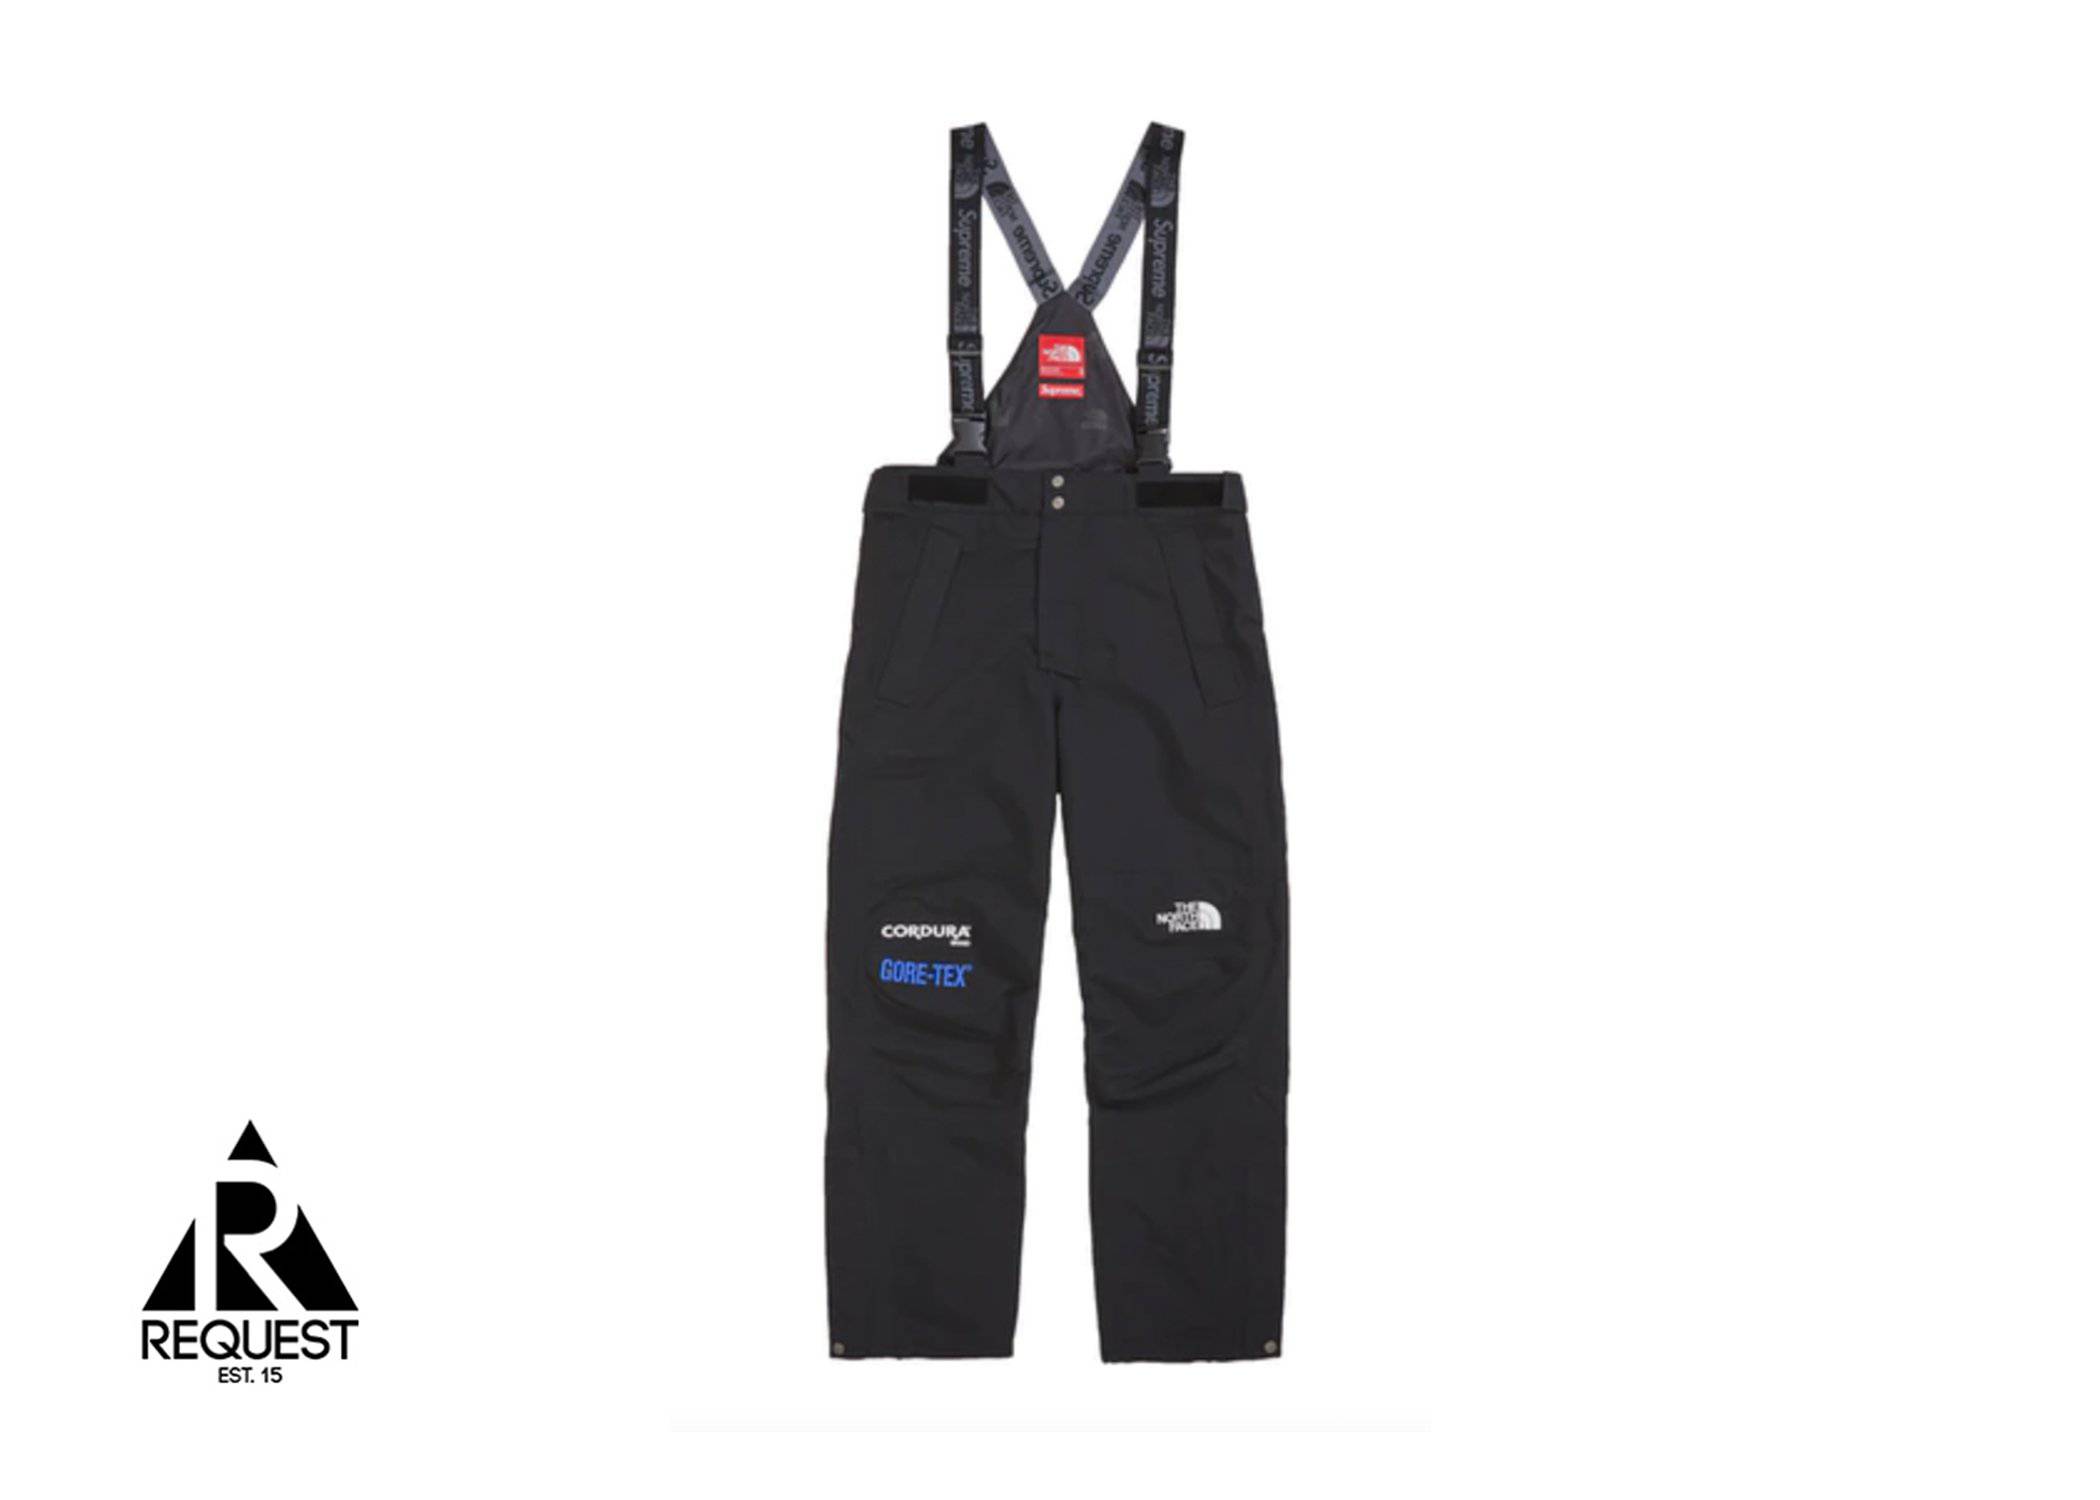 Supreme x TNF Expedition Pant “Black”